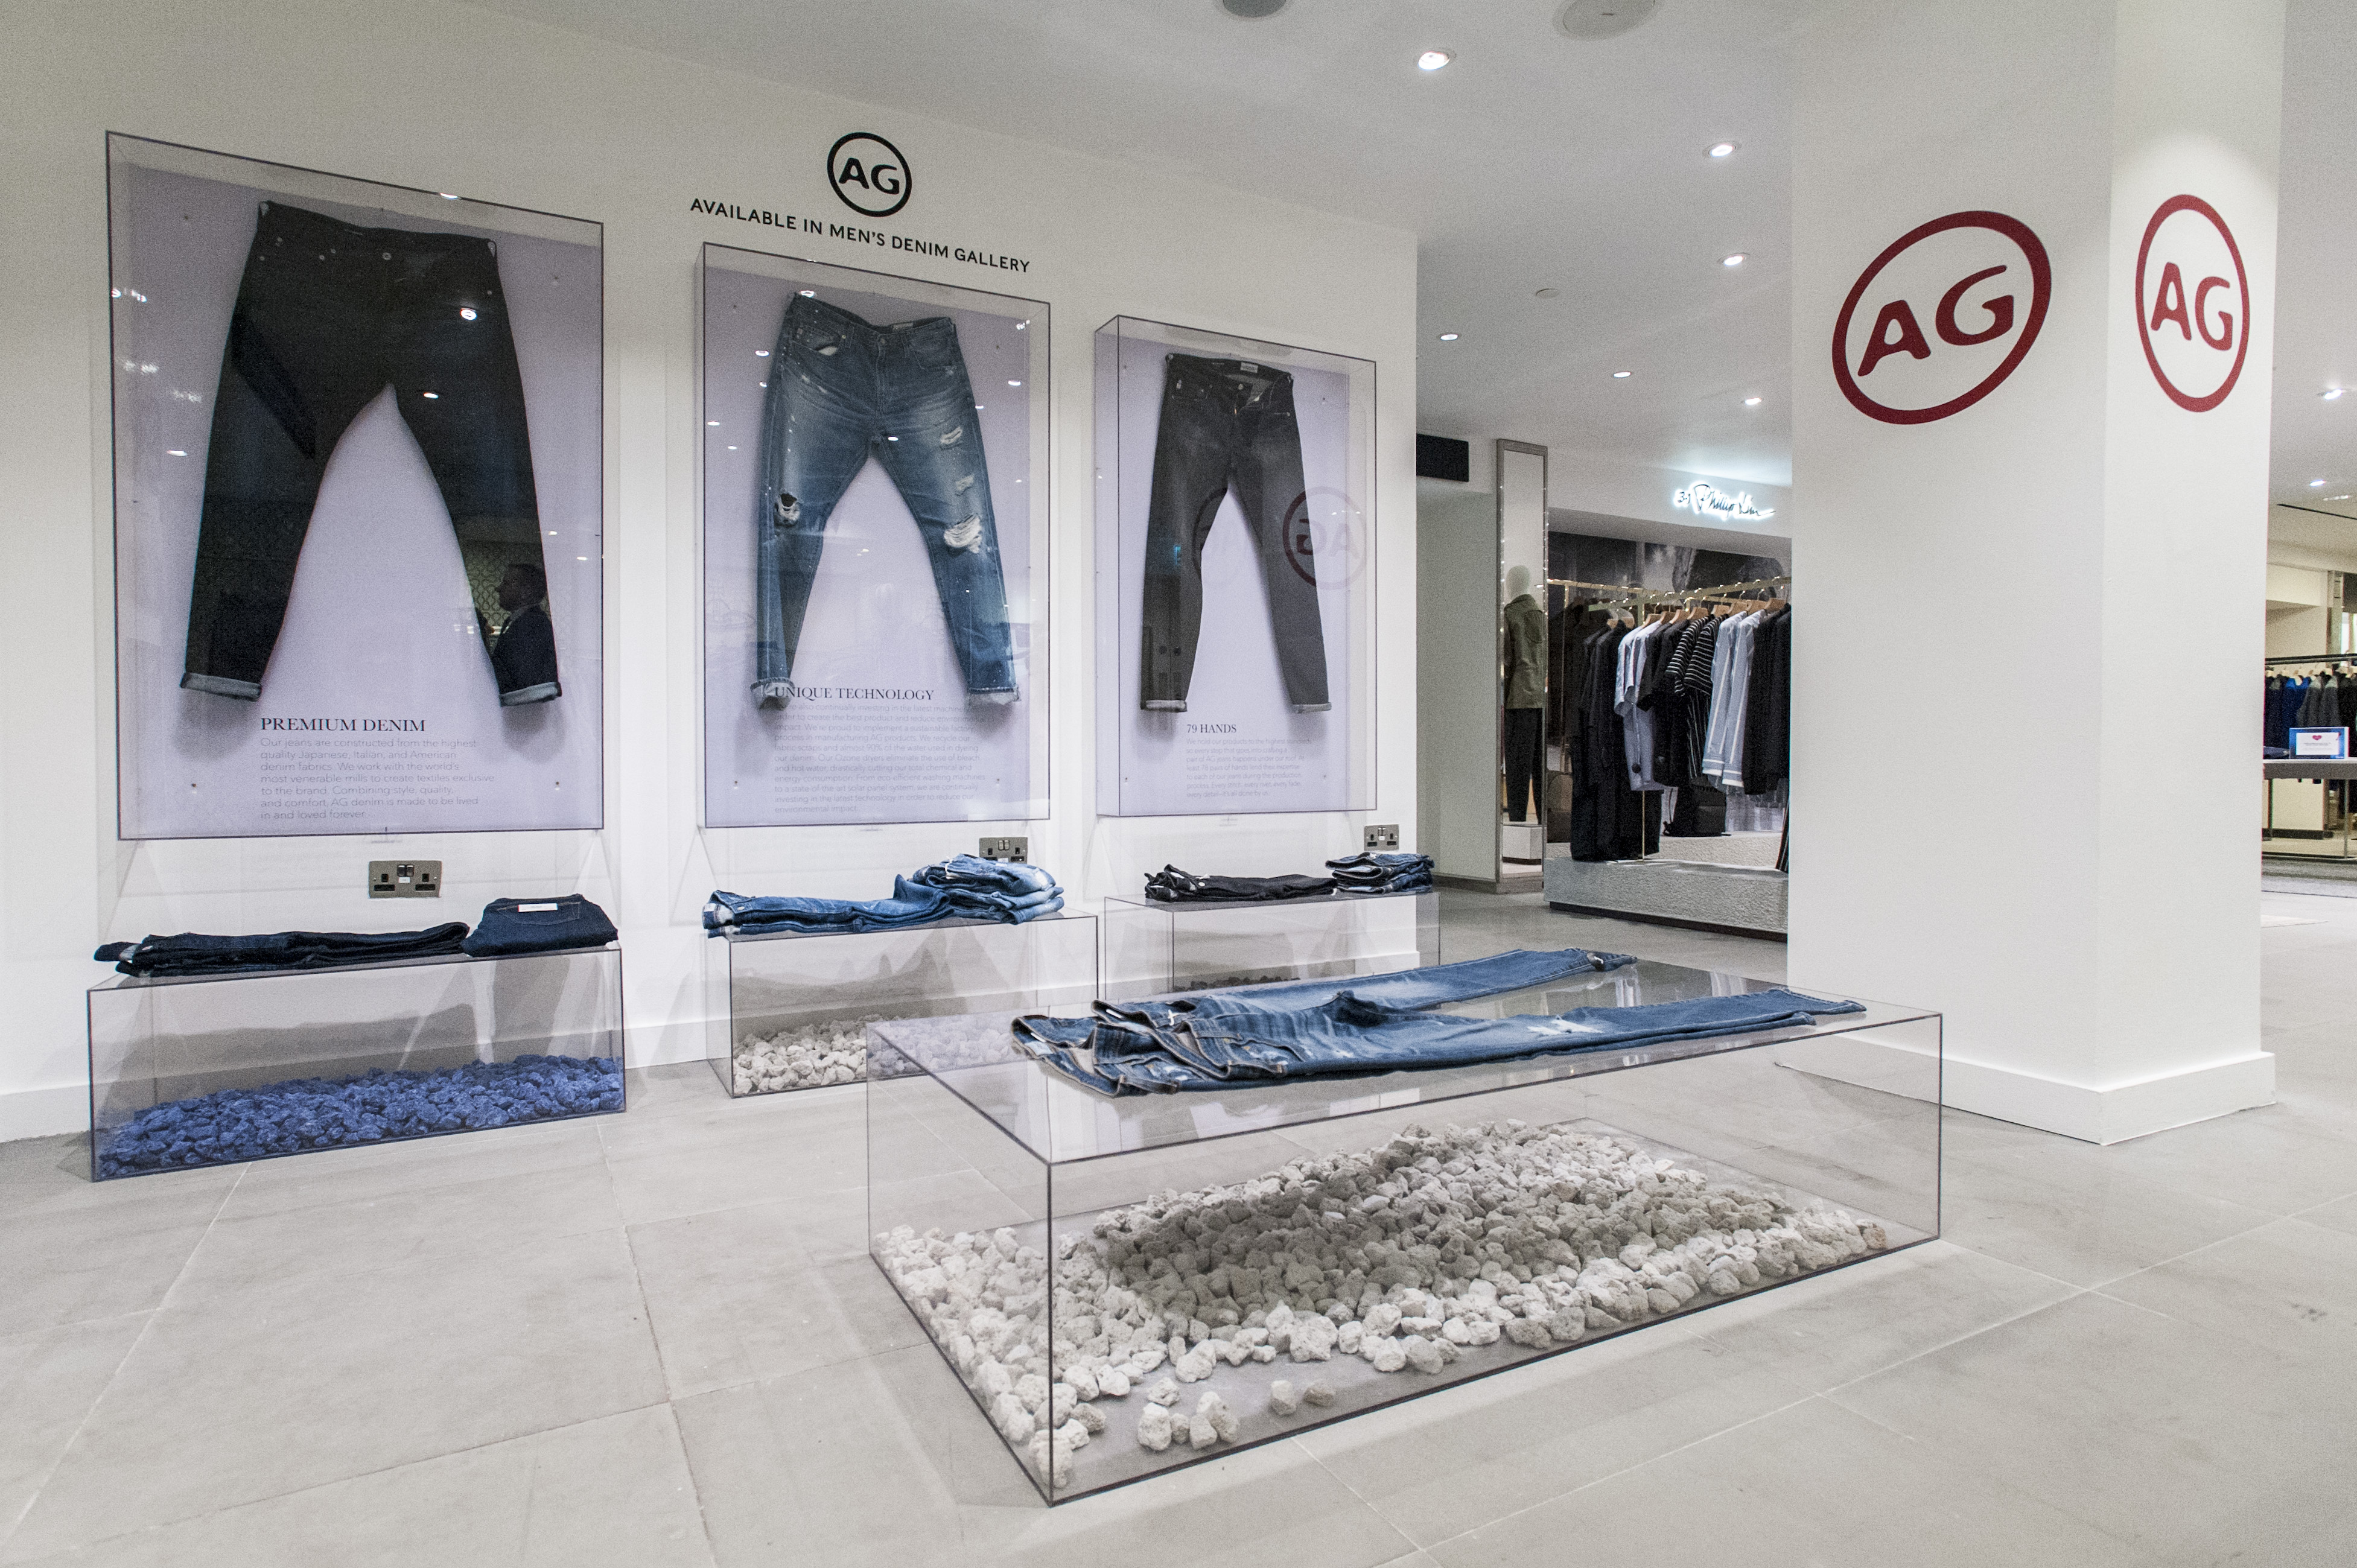 A Look Inside The AG Jeans Pop-Up Installation At Harrods